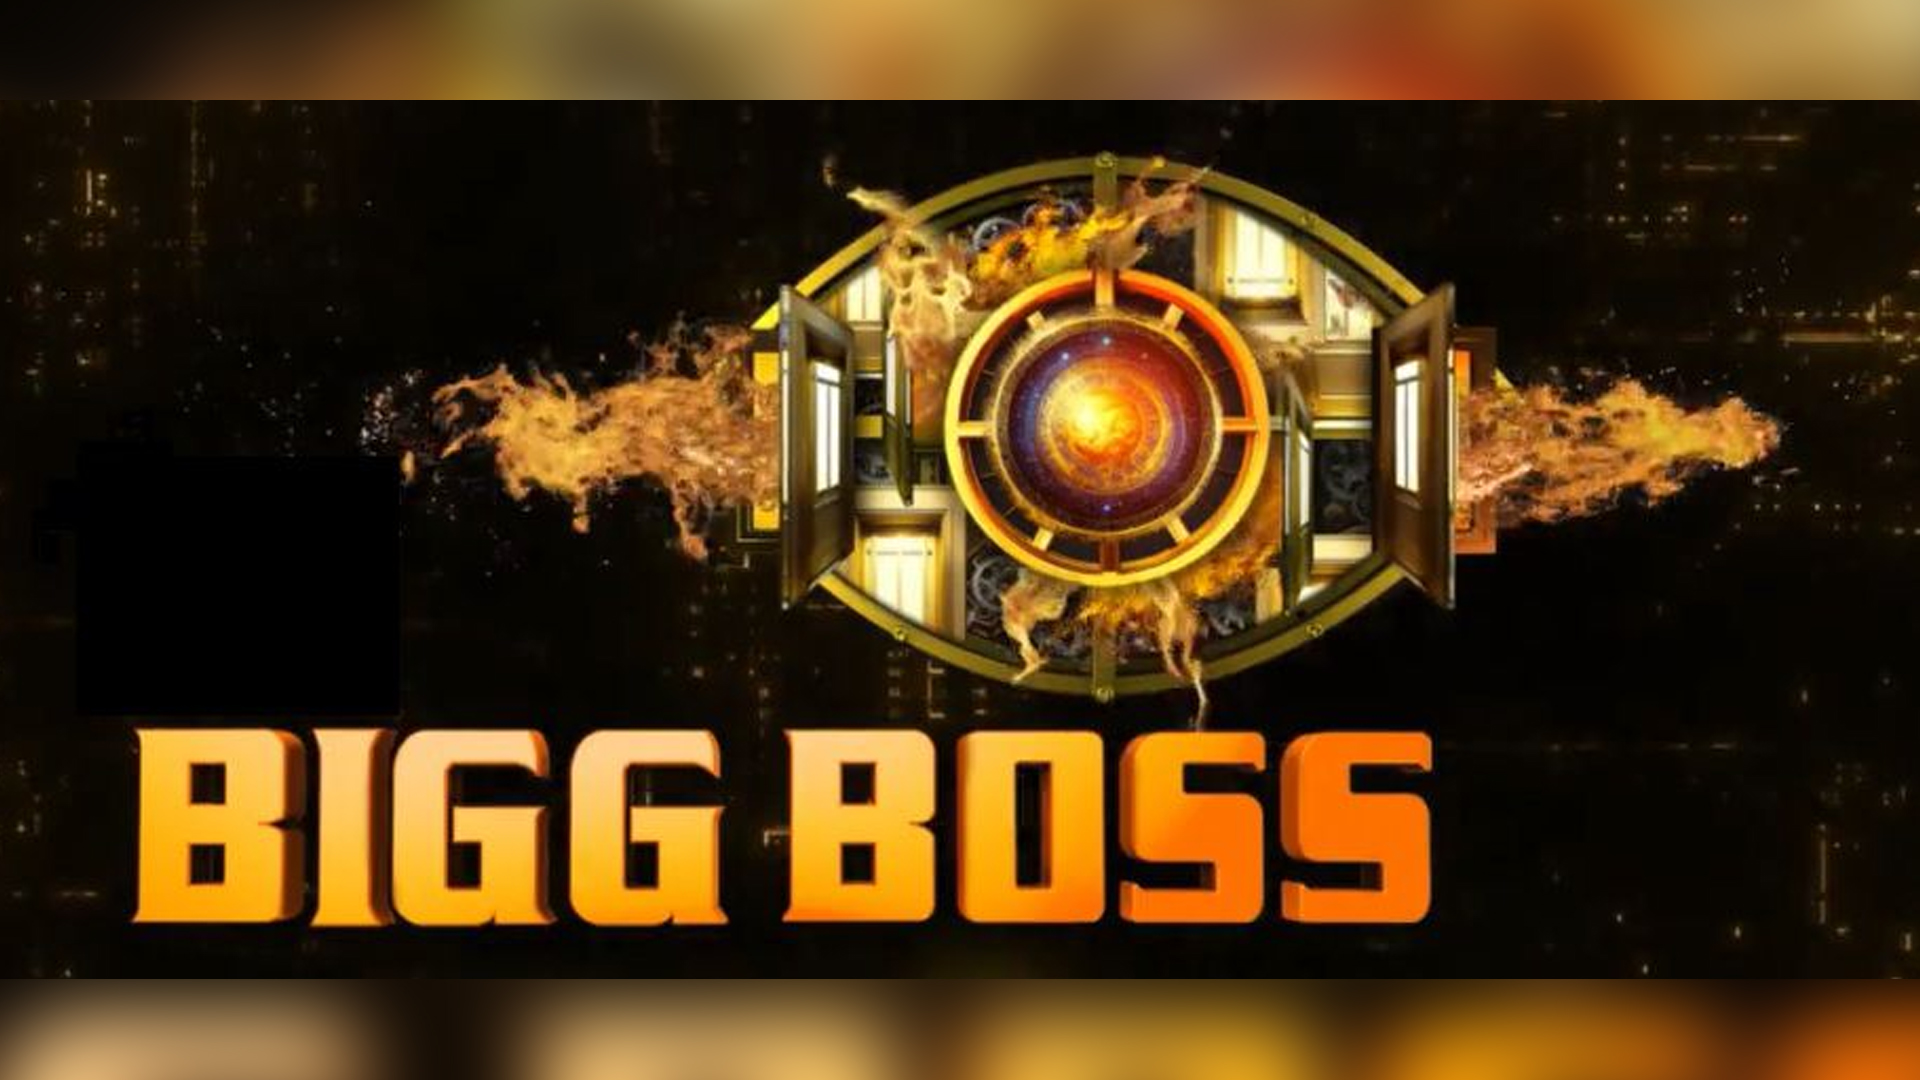 Bigg Boss 17 fans can witness special live shows with unfiltered moments and insider scoop planned like never before this season!